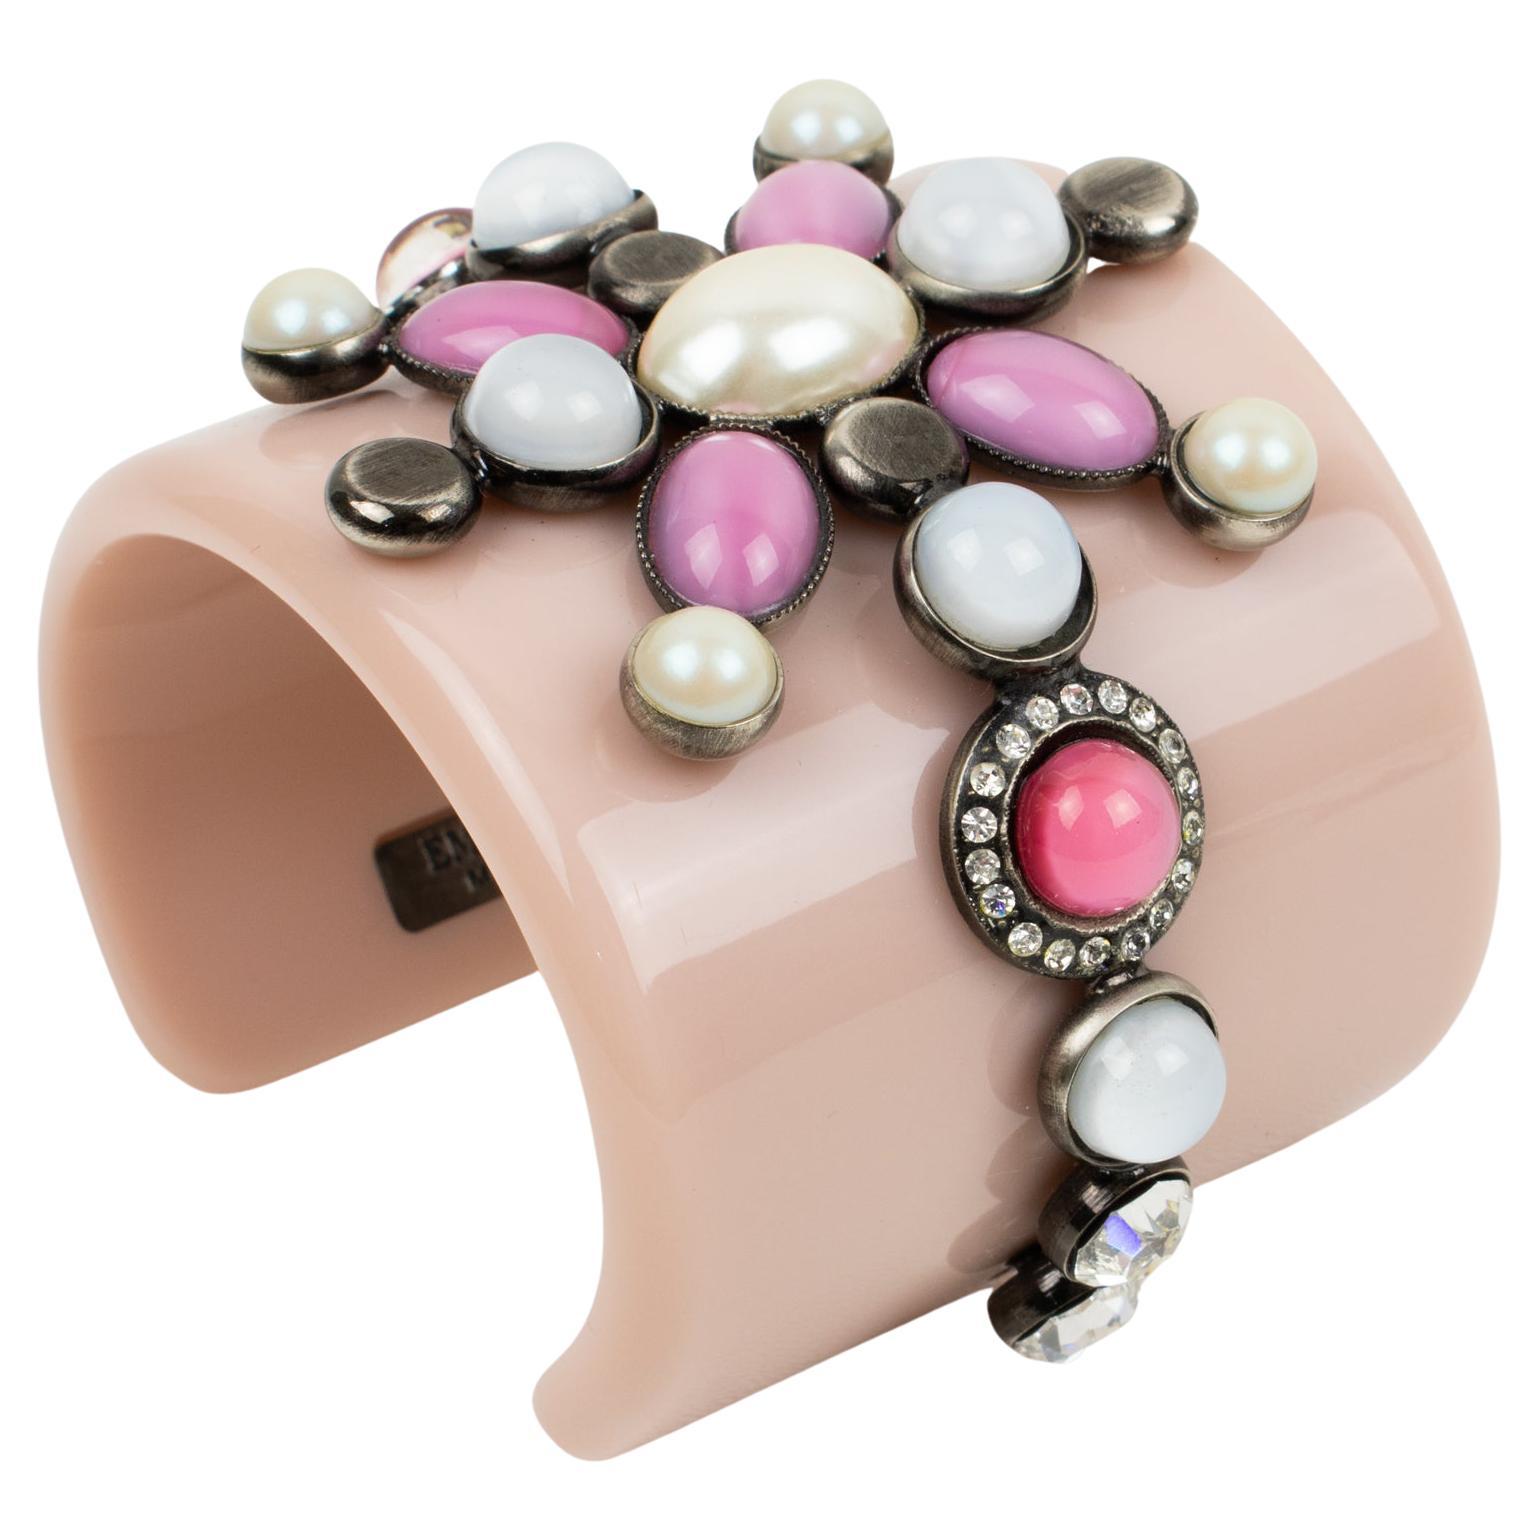 Emilio Pucci Jeweled Pale Pink Resin Bracelet Bangle For Sale